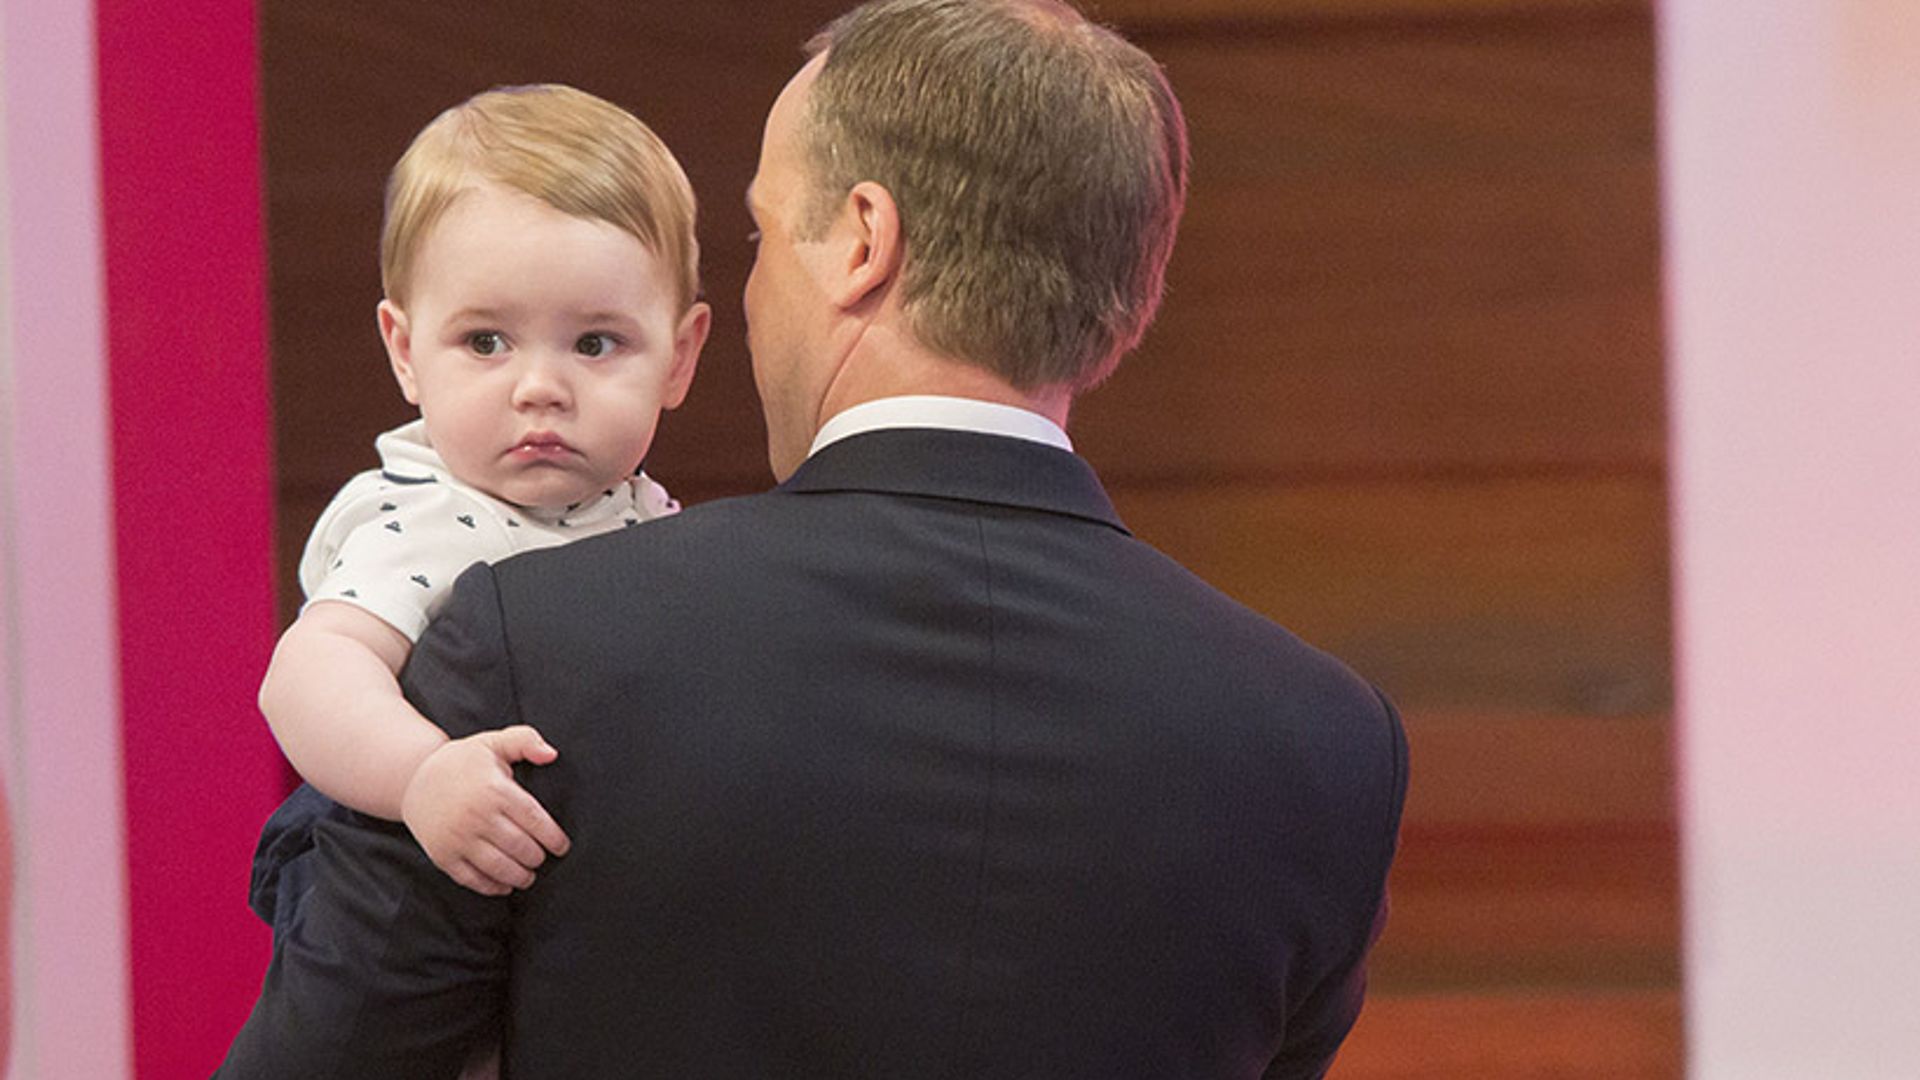 Meet the 10-month-old who is the spitting image of Prince George